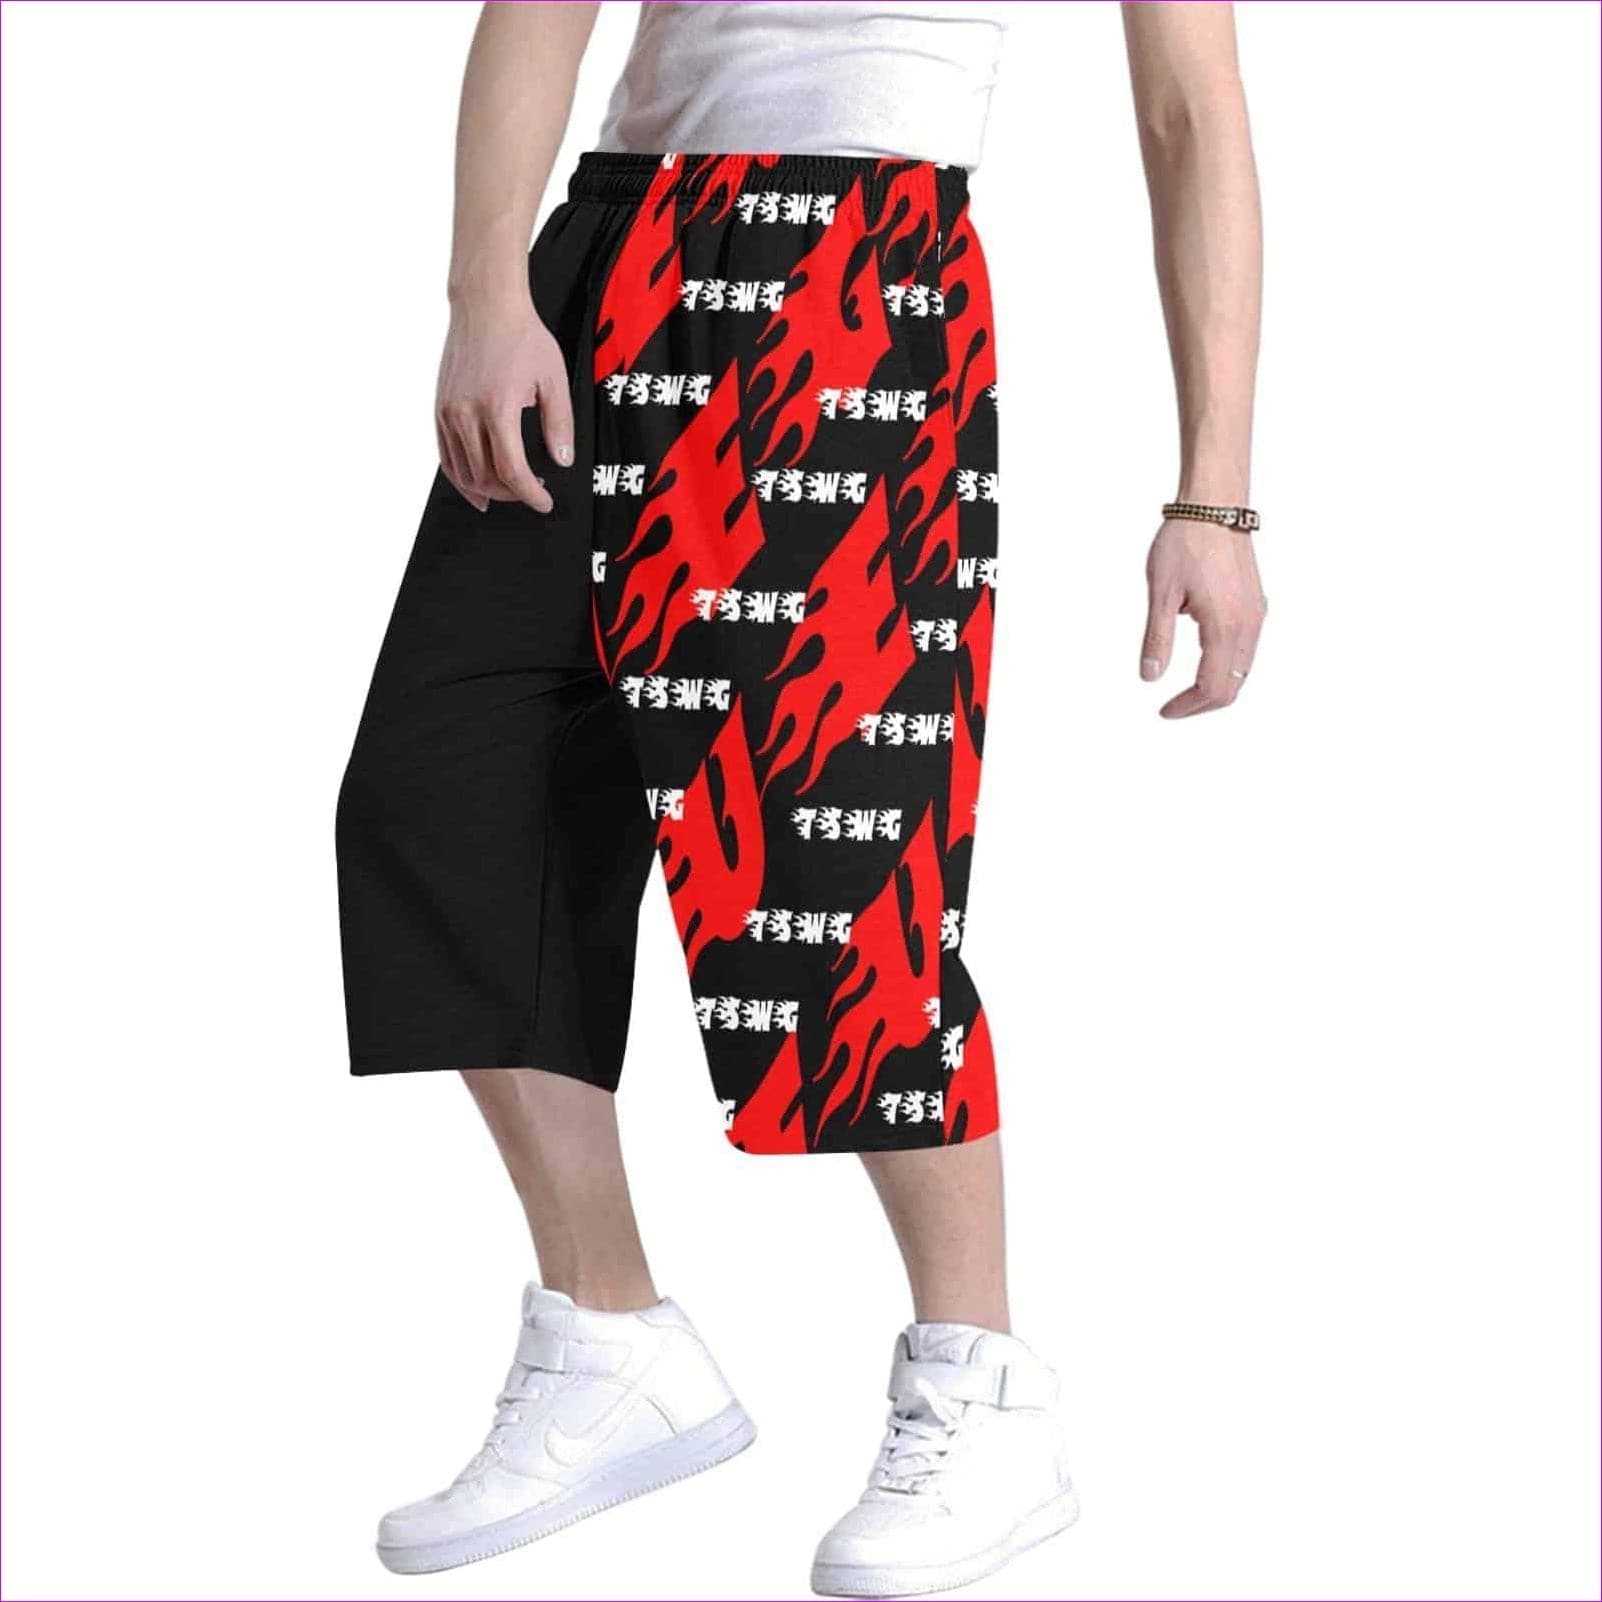 TSWG Fuego Flame Men's All Over Print Baggy Shorts (Model L37) - TSWG Fuego Flame Men's Baggy Shorts - Red - 2 styles - mens shorts at TFC&H Co.